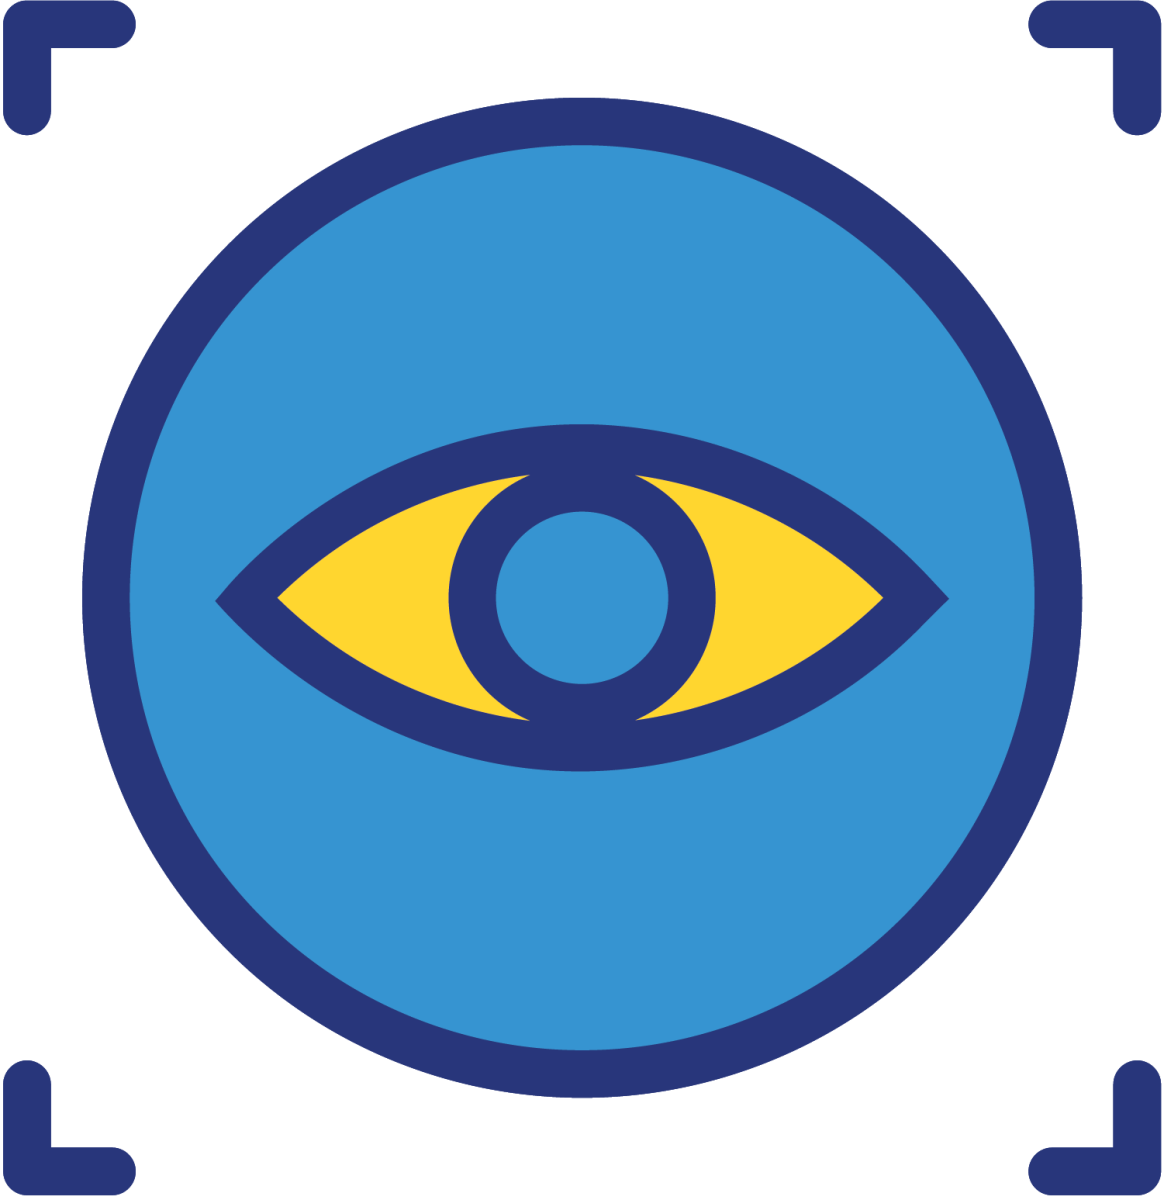 "Eye icon for Vision"